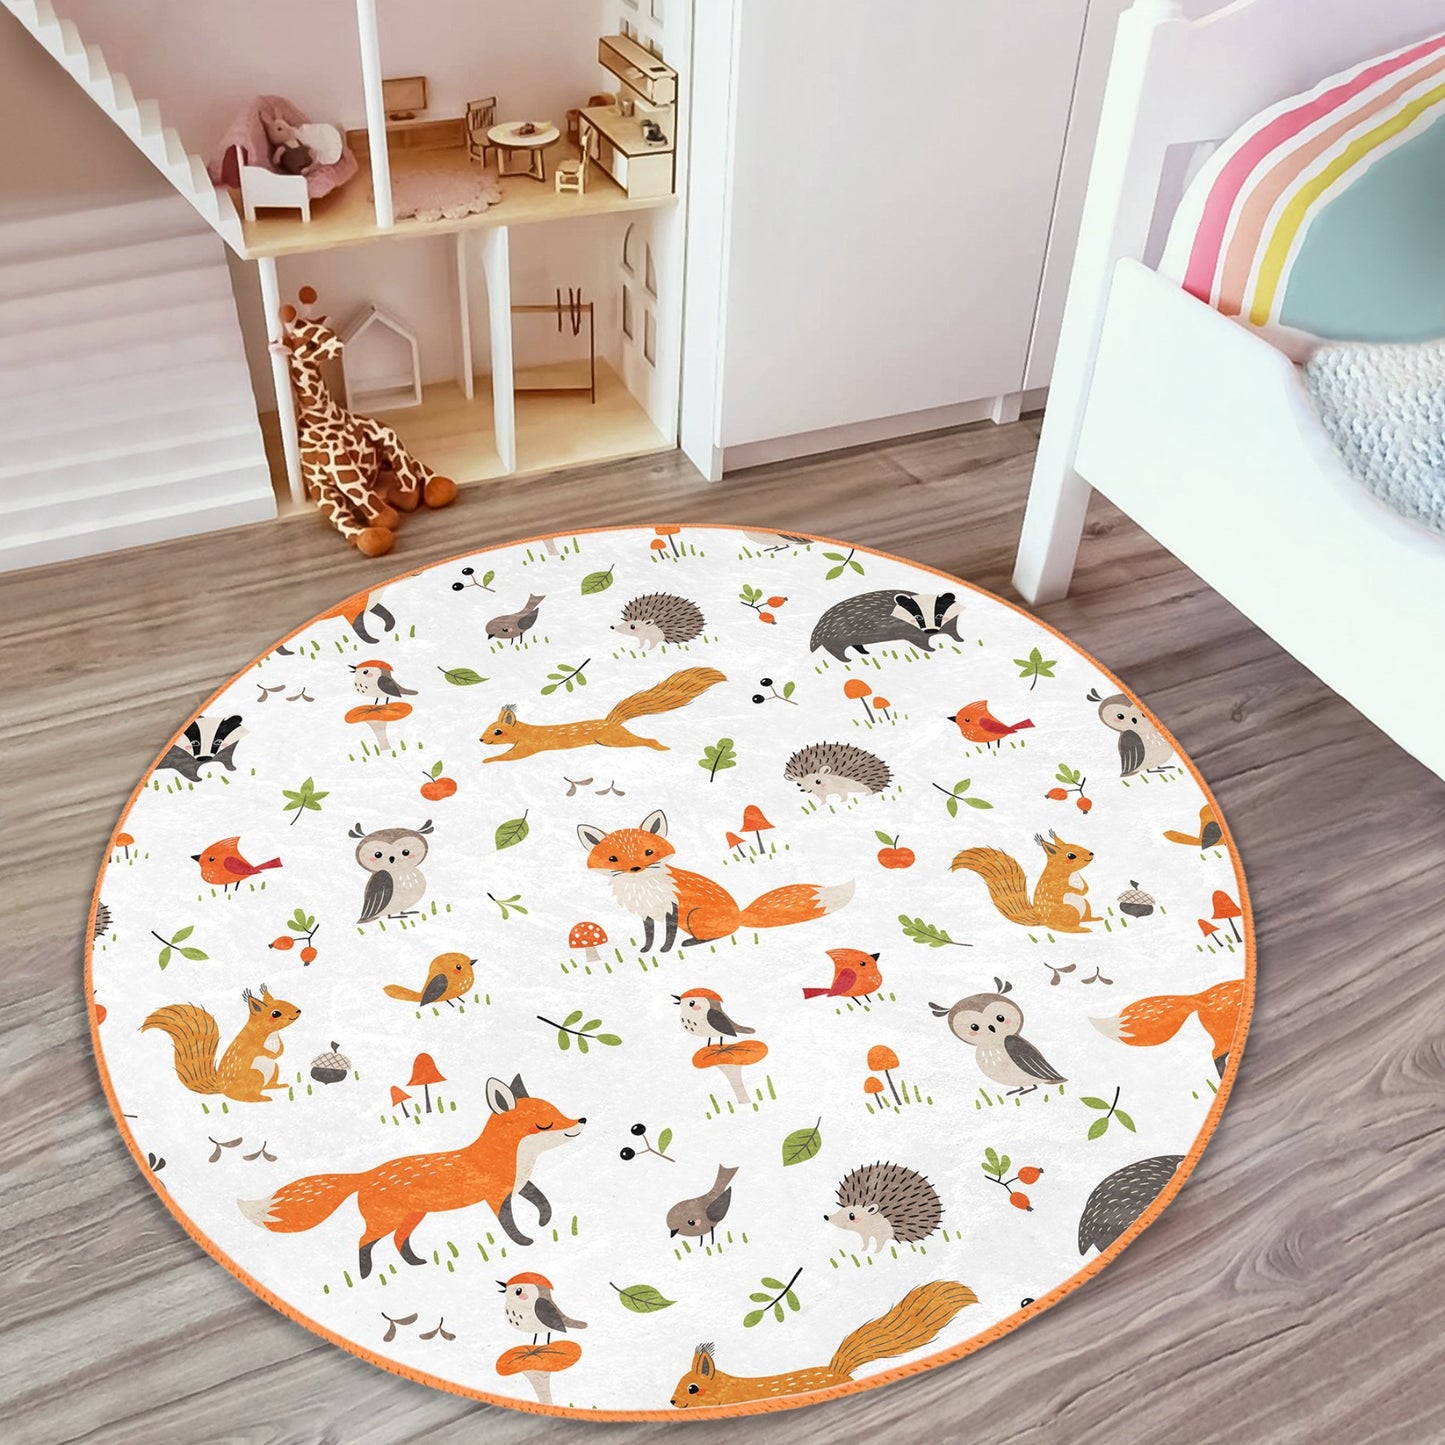 Homeezone's Little Fox in the Forest Kids' Room Washable Rug